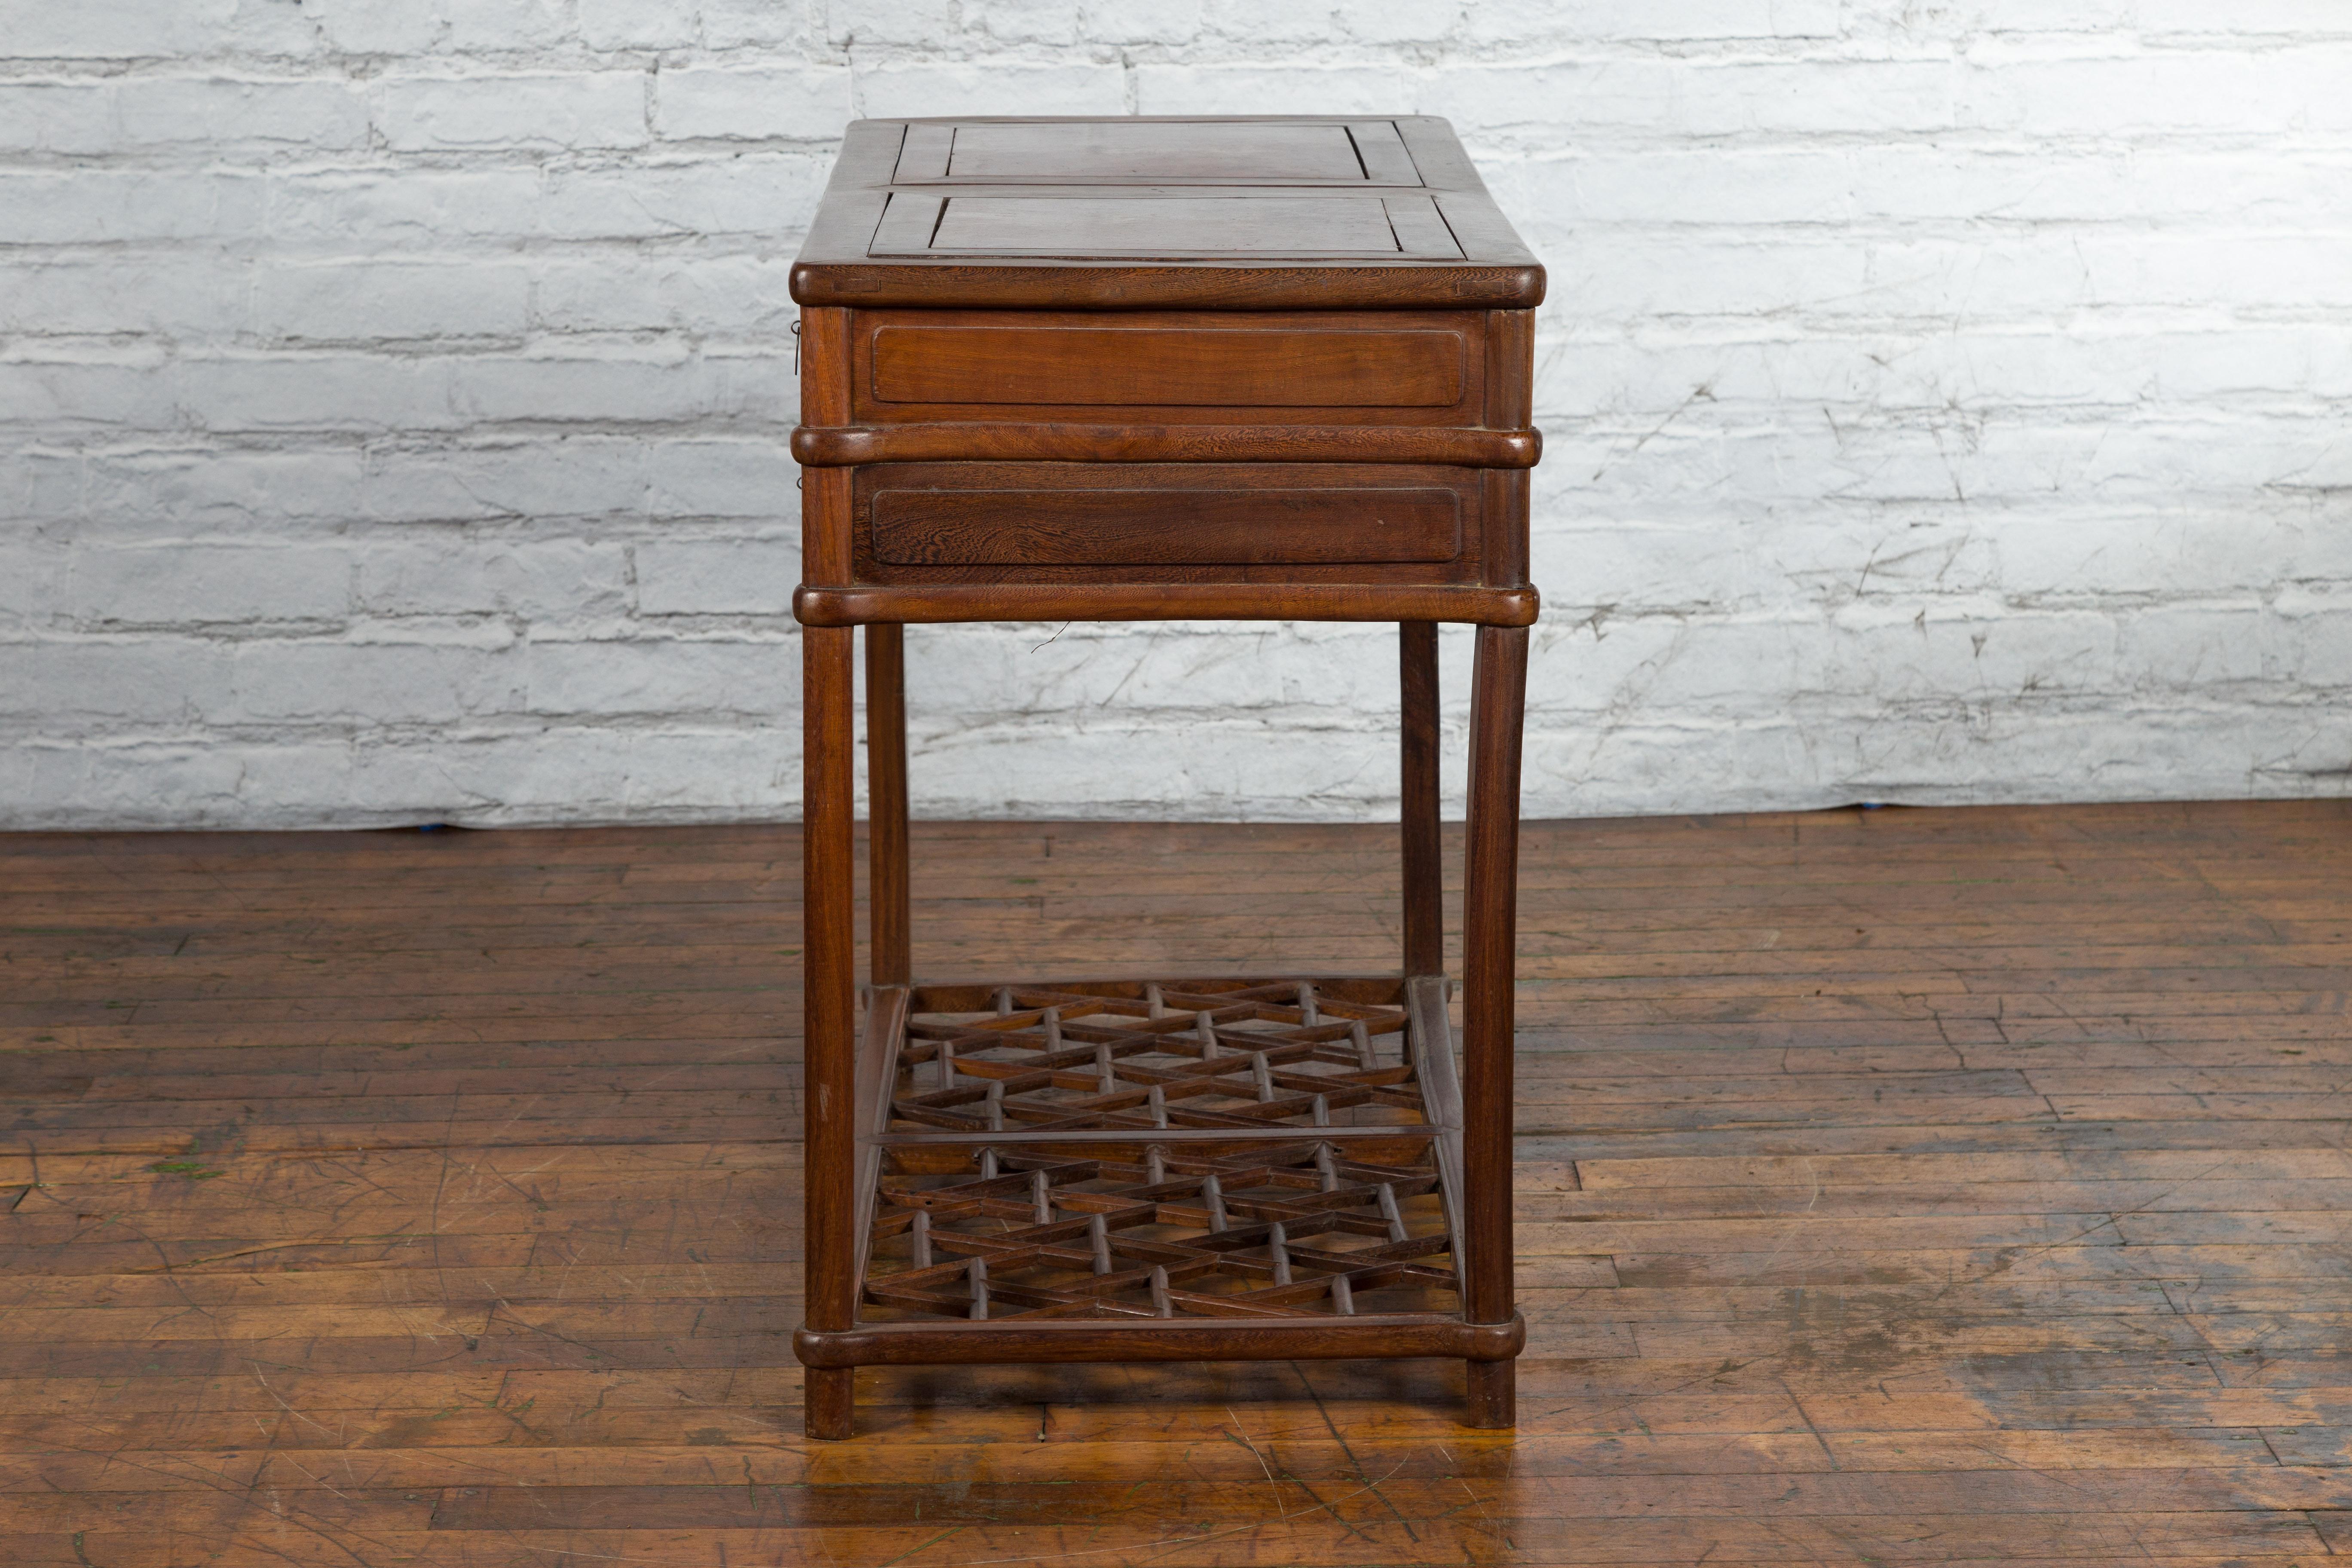 Qing Dynasty 19th Century Desk with Burlwood Top, Drawers and Cracked Ice Shelf For Sale 7